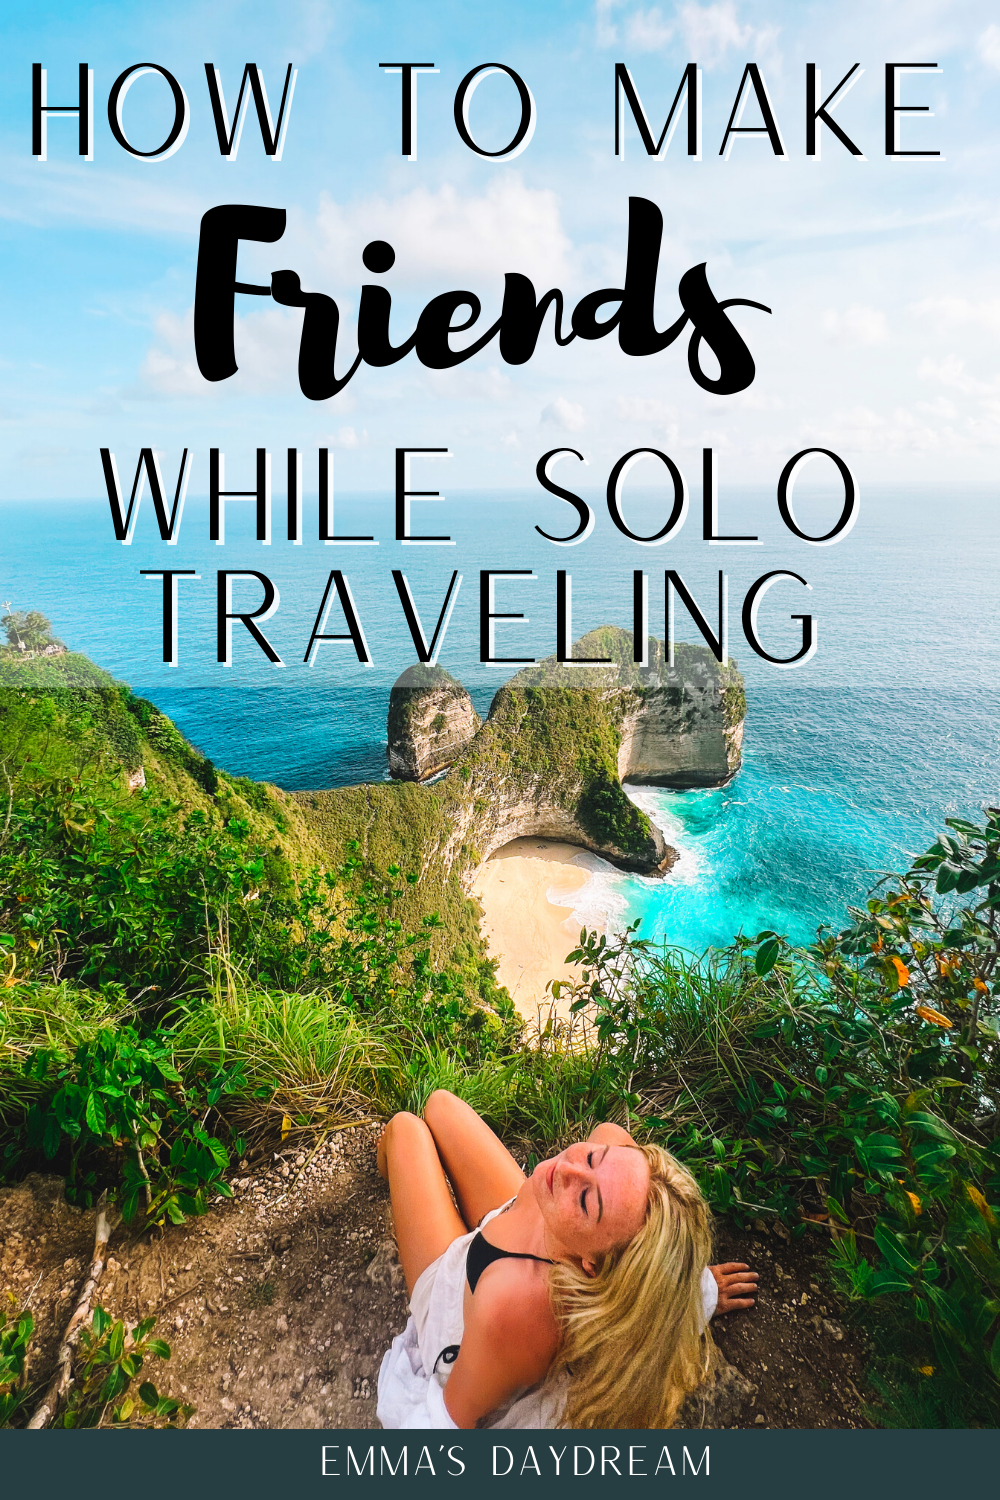 How to make friends while traveling alone